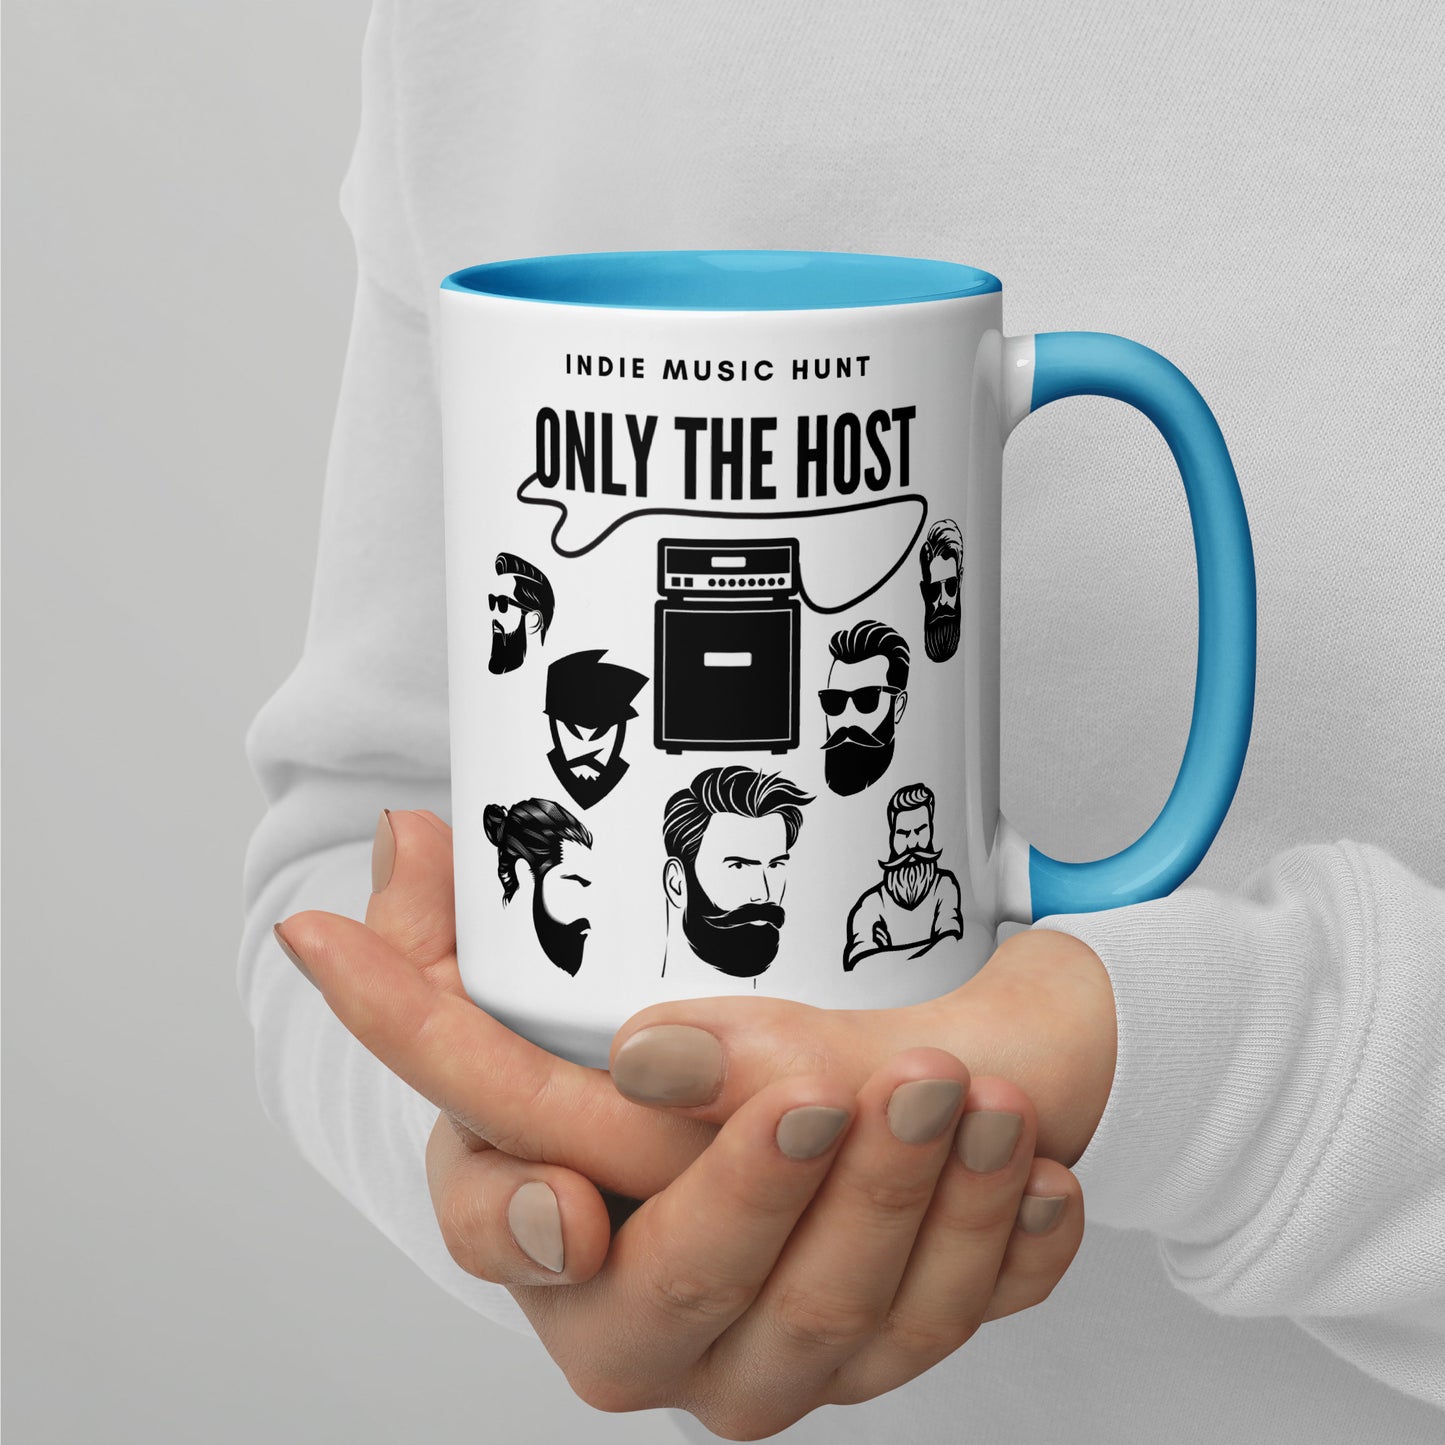 Only The Host Indie Music Hunt Mug With Color Inside